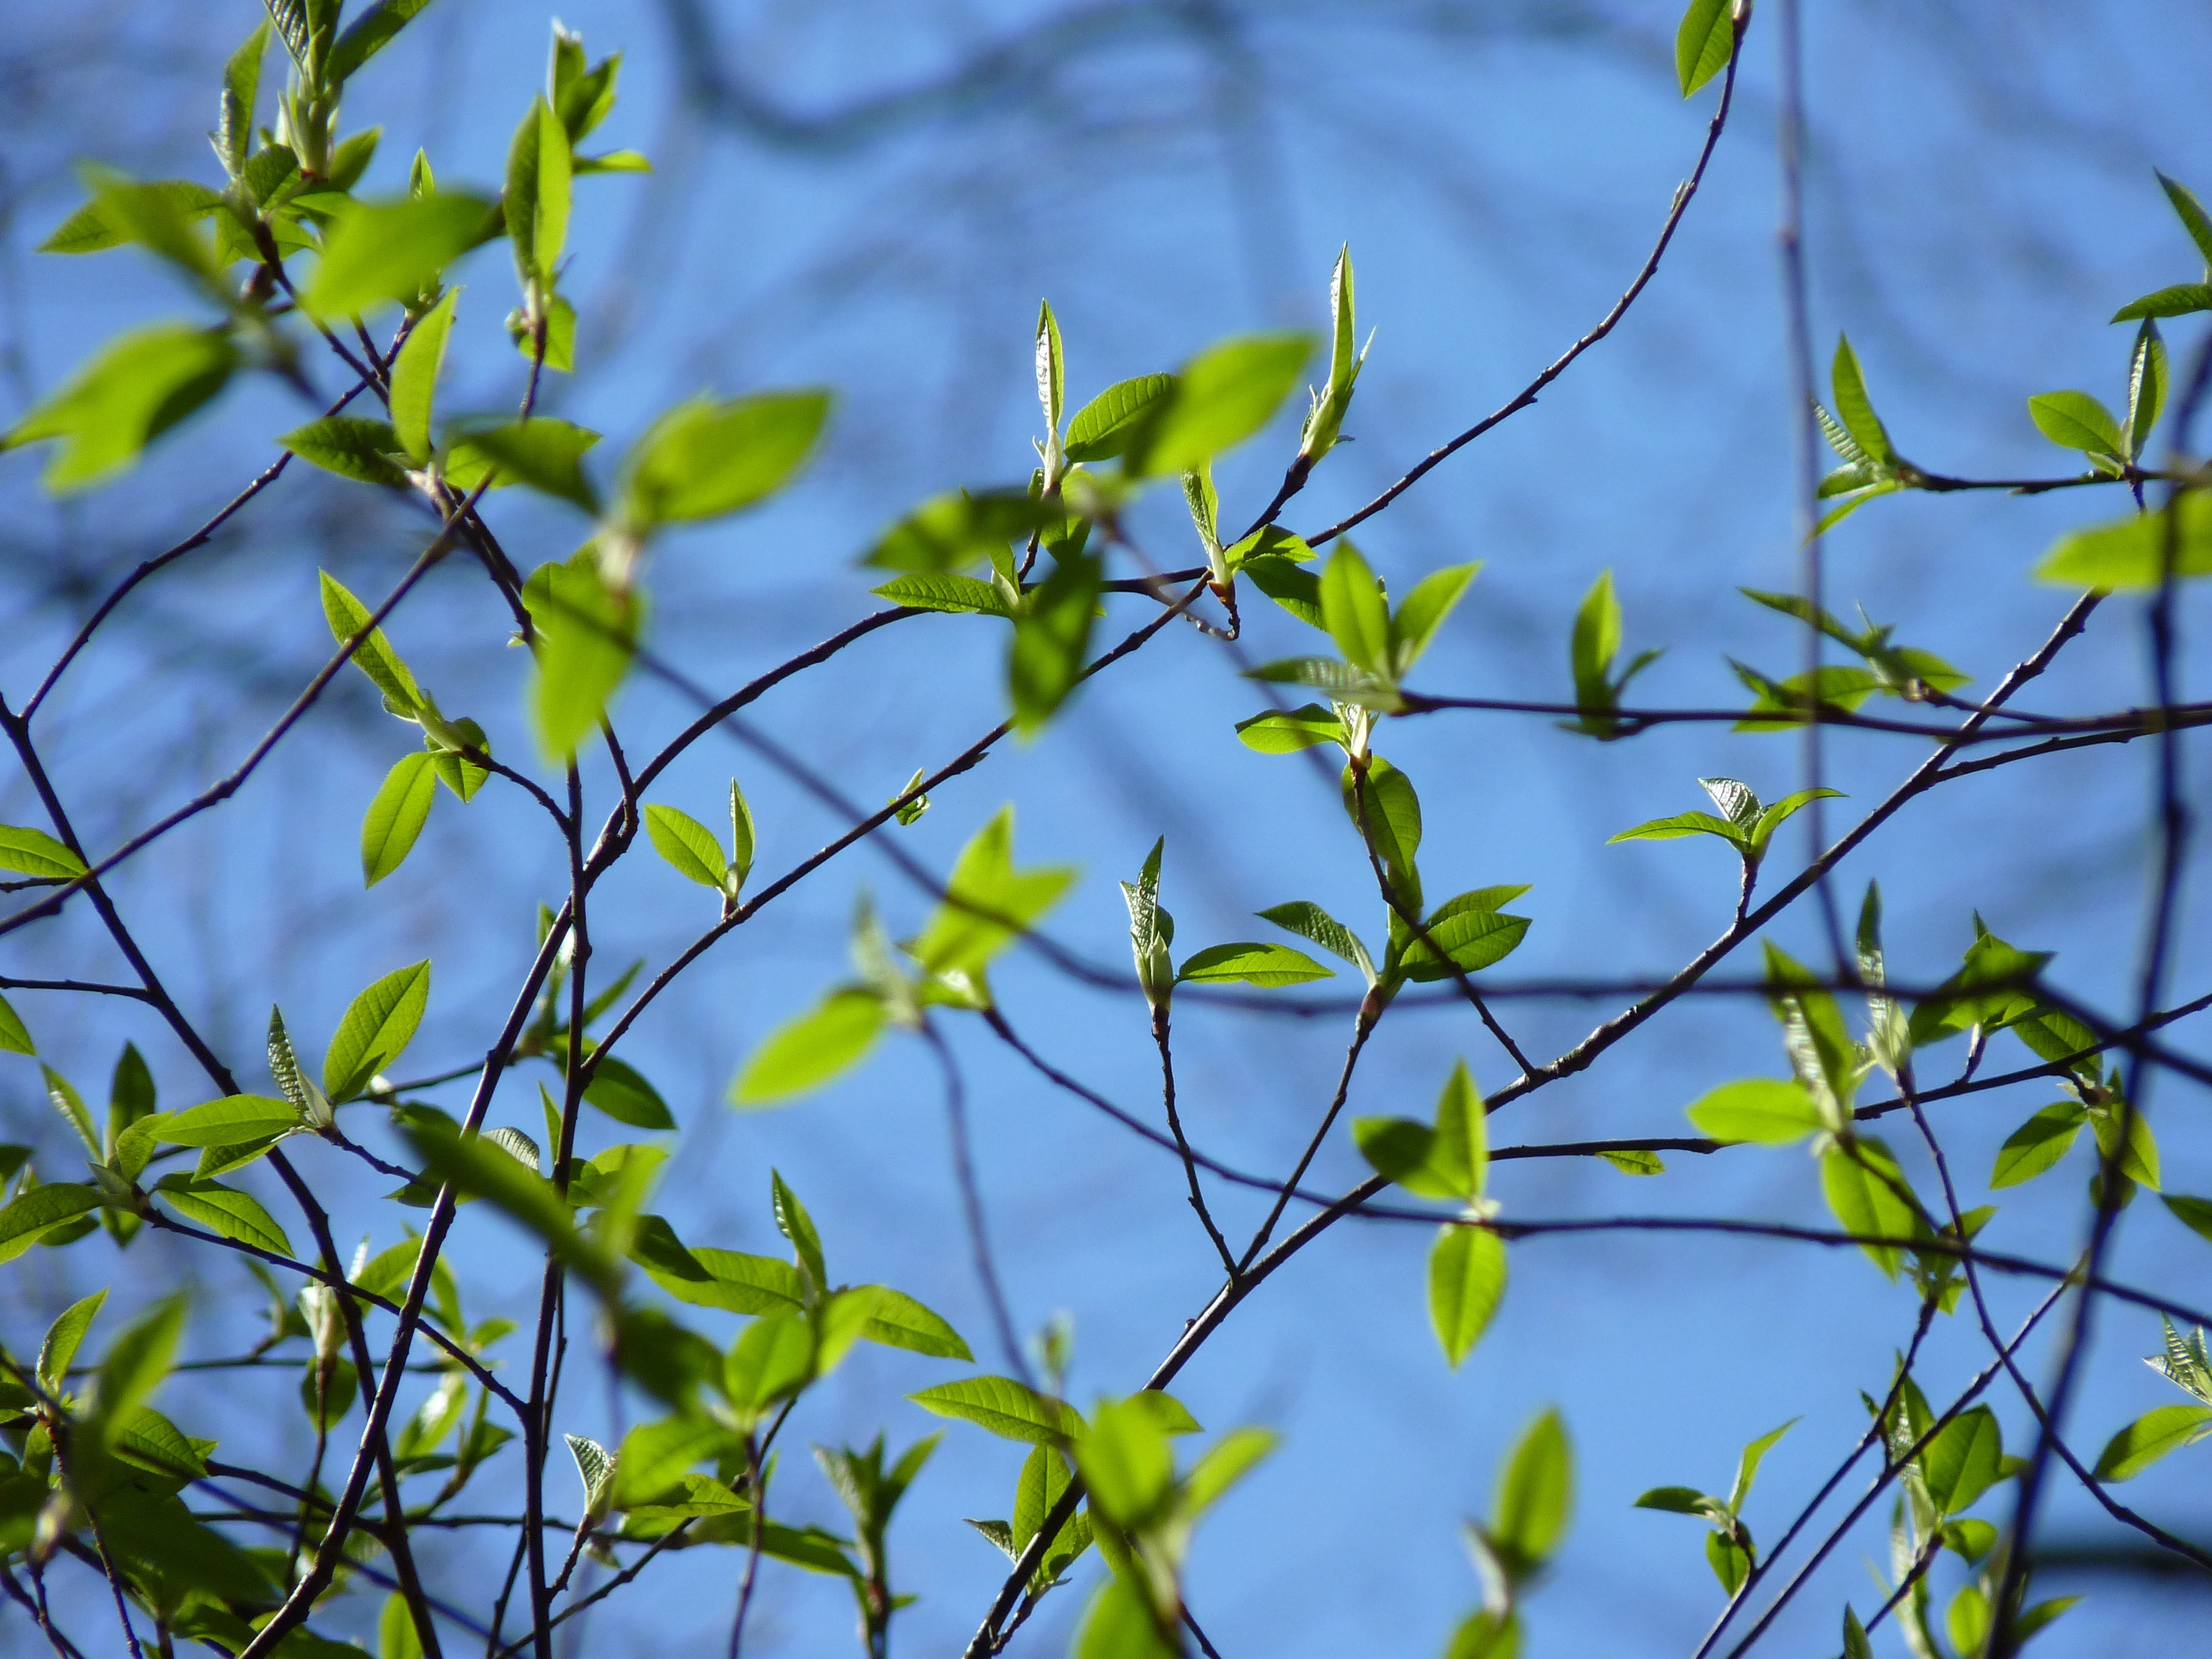 green leafed branches in tilt shift lens photography